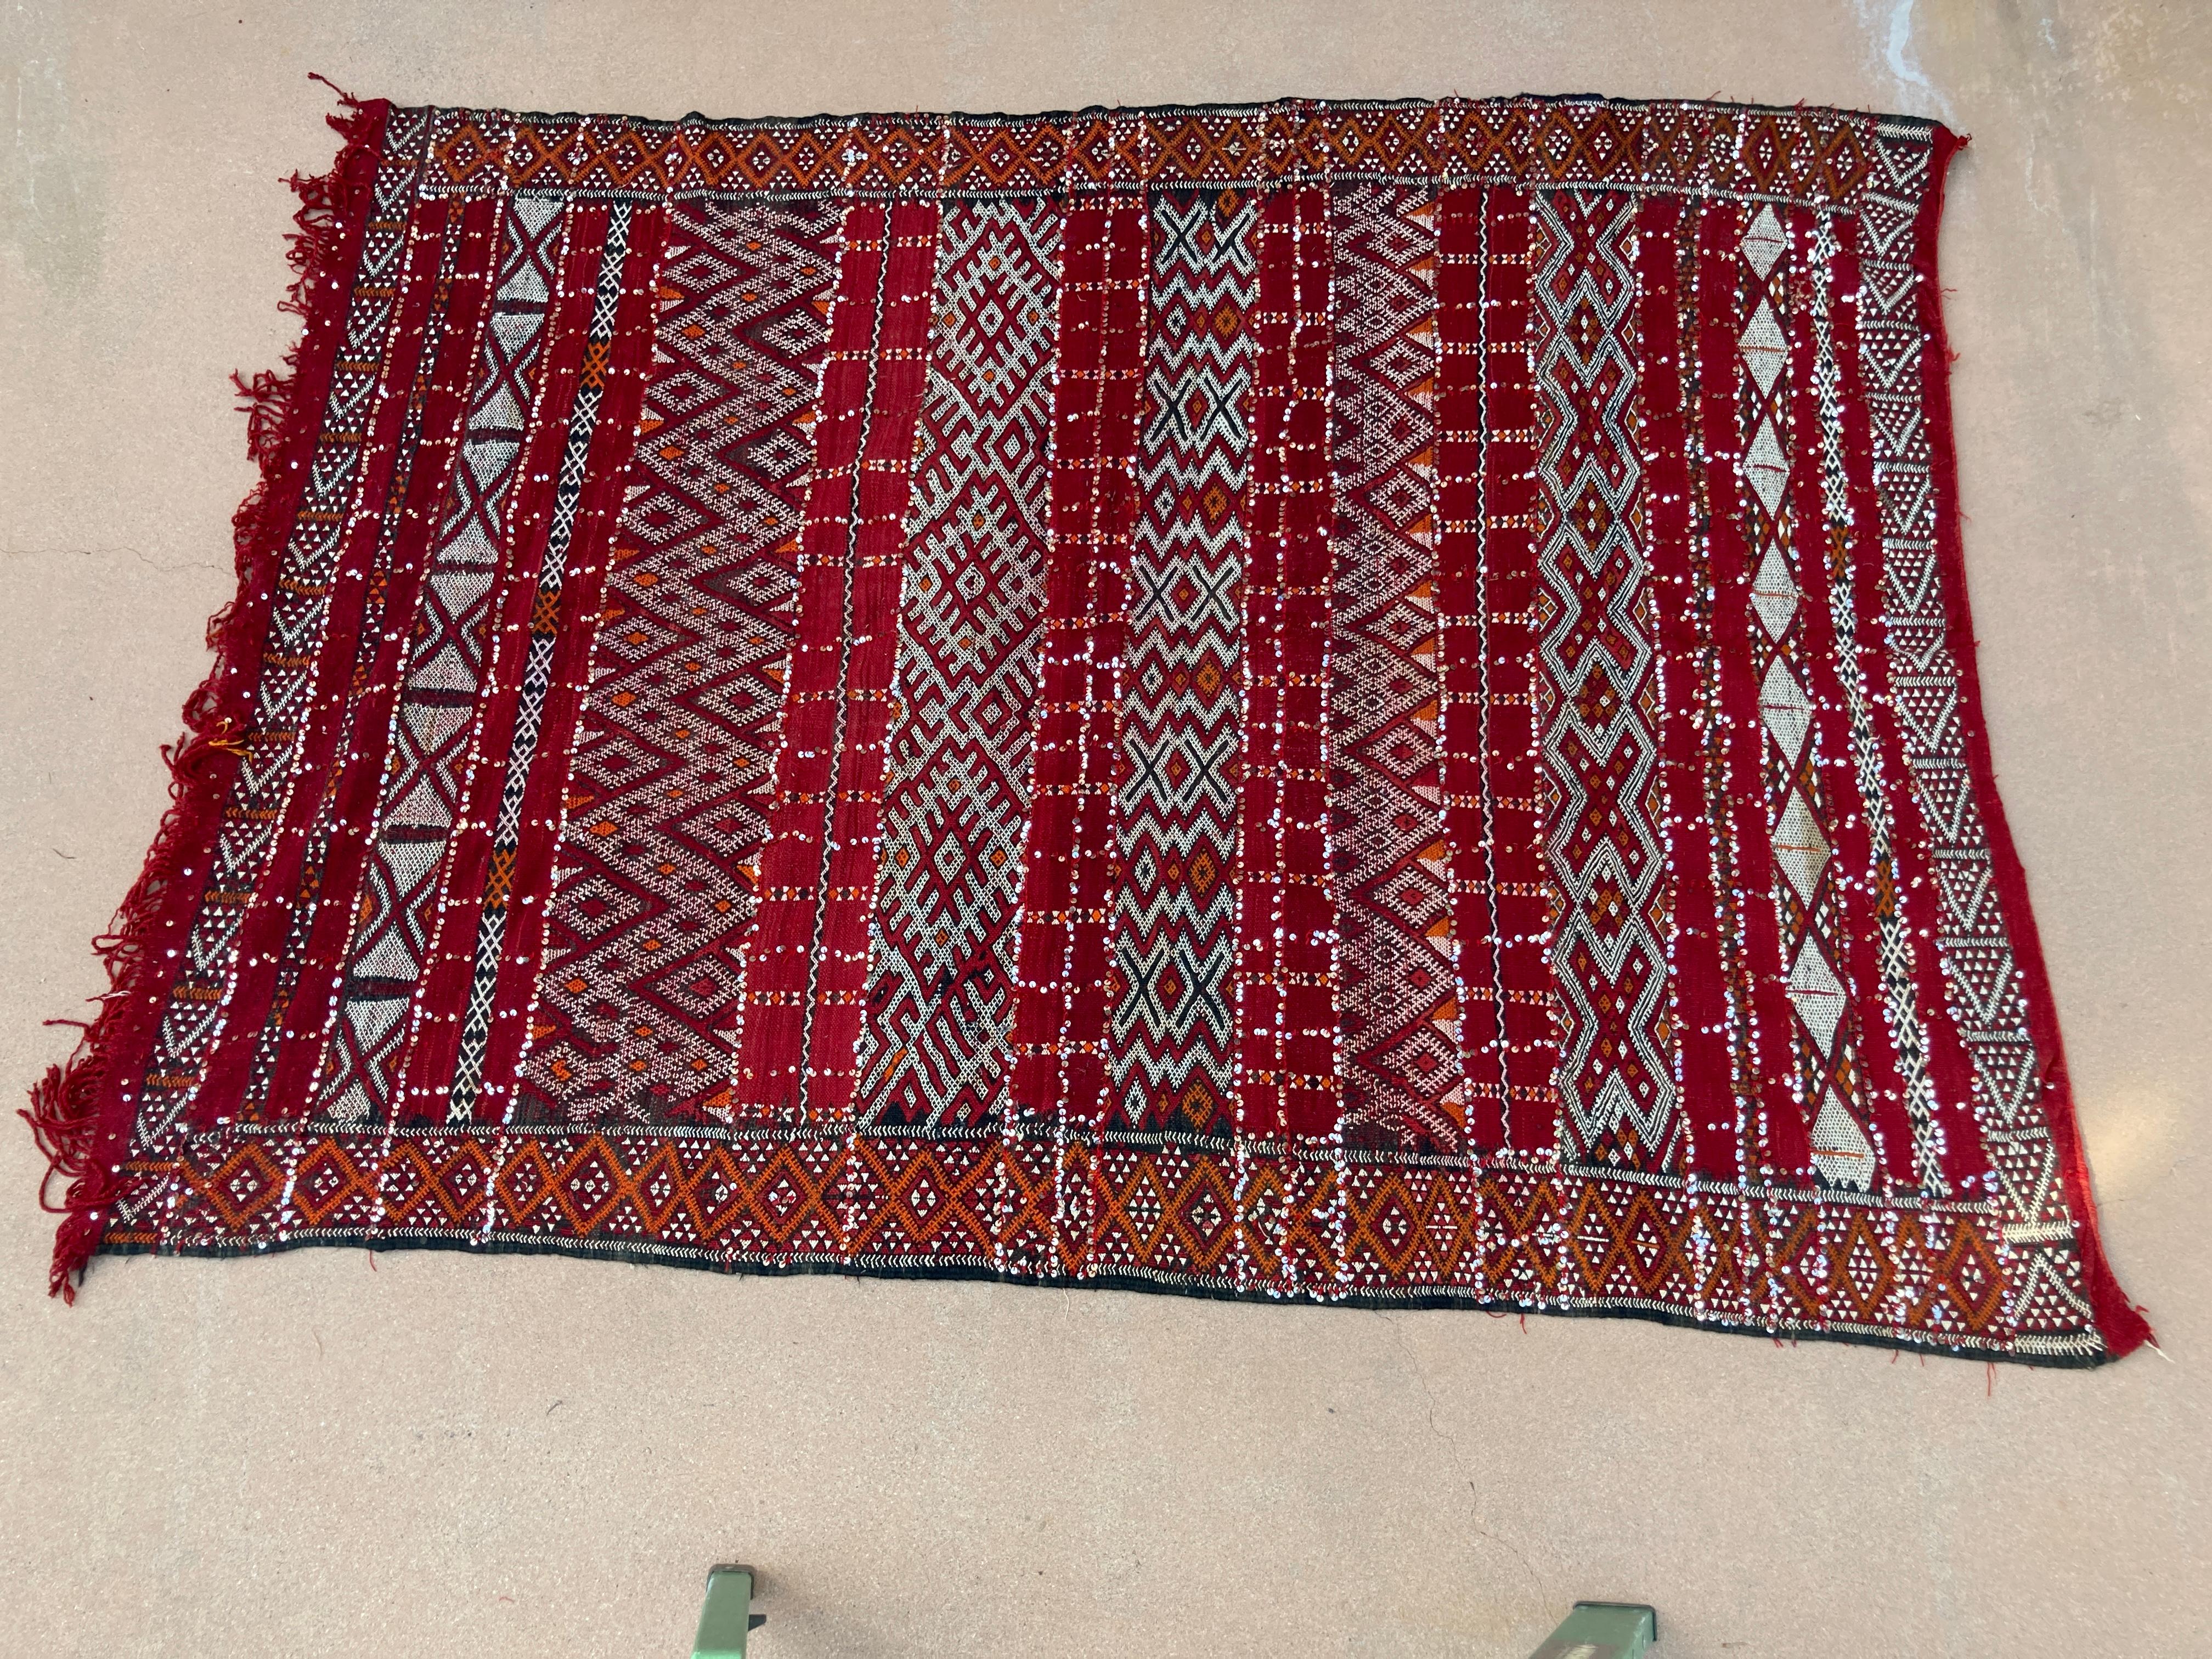 Hand-Woven Moroccan Vintage Ethnic Textile with Sequins North Africa, Handira